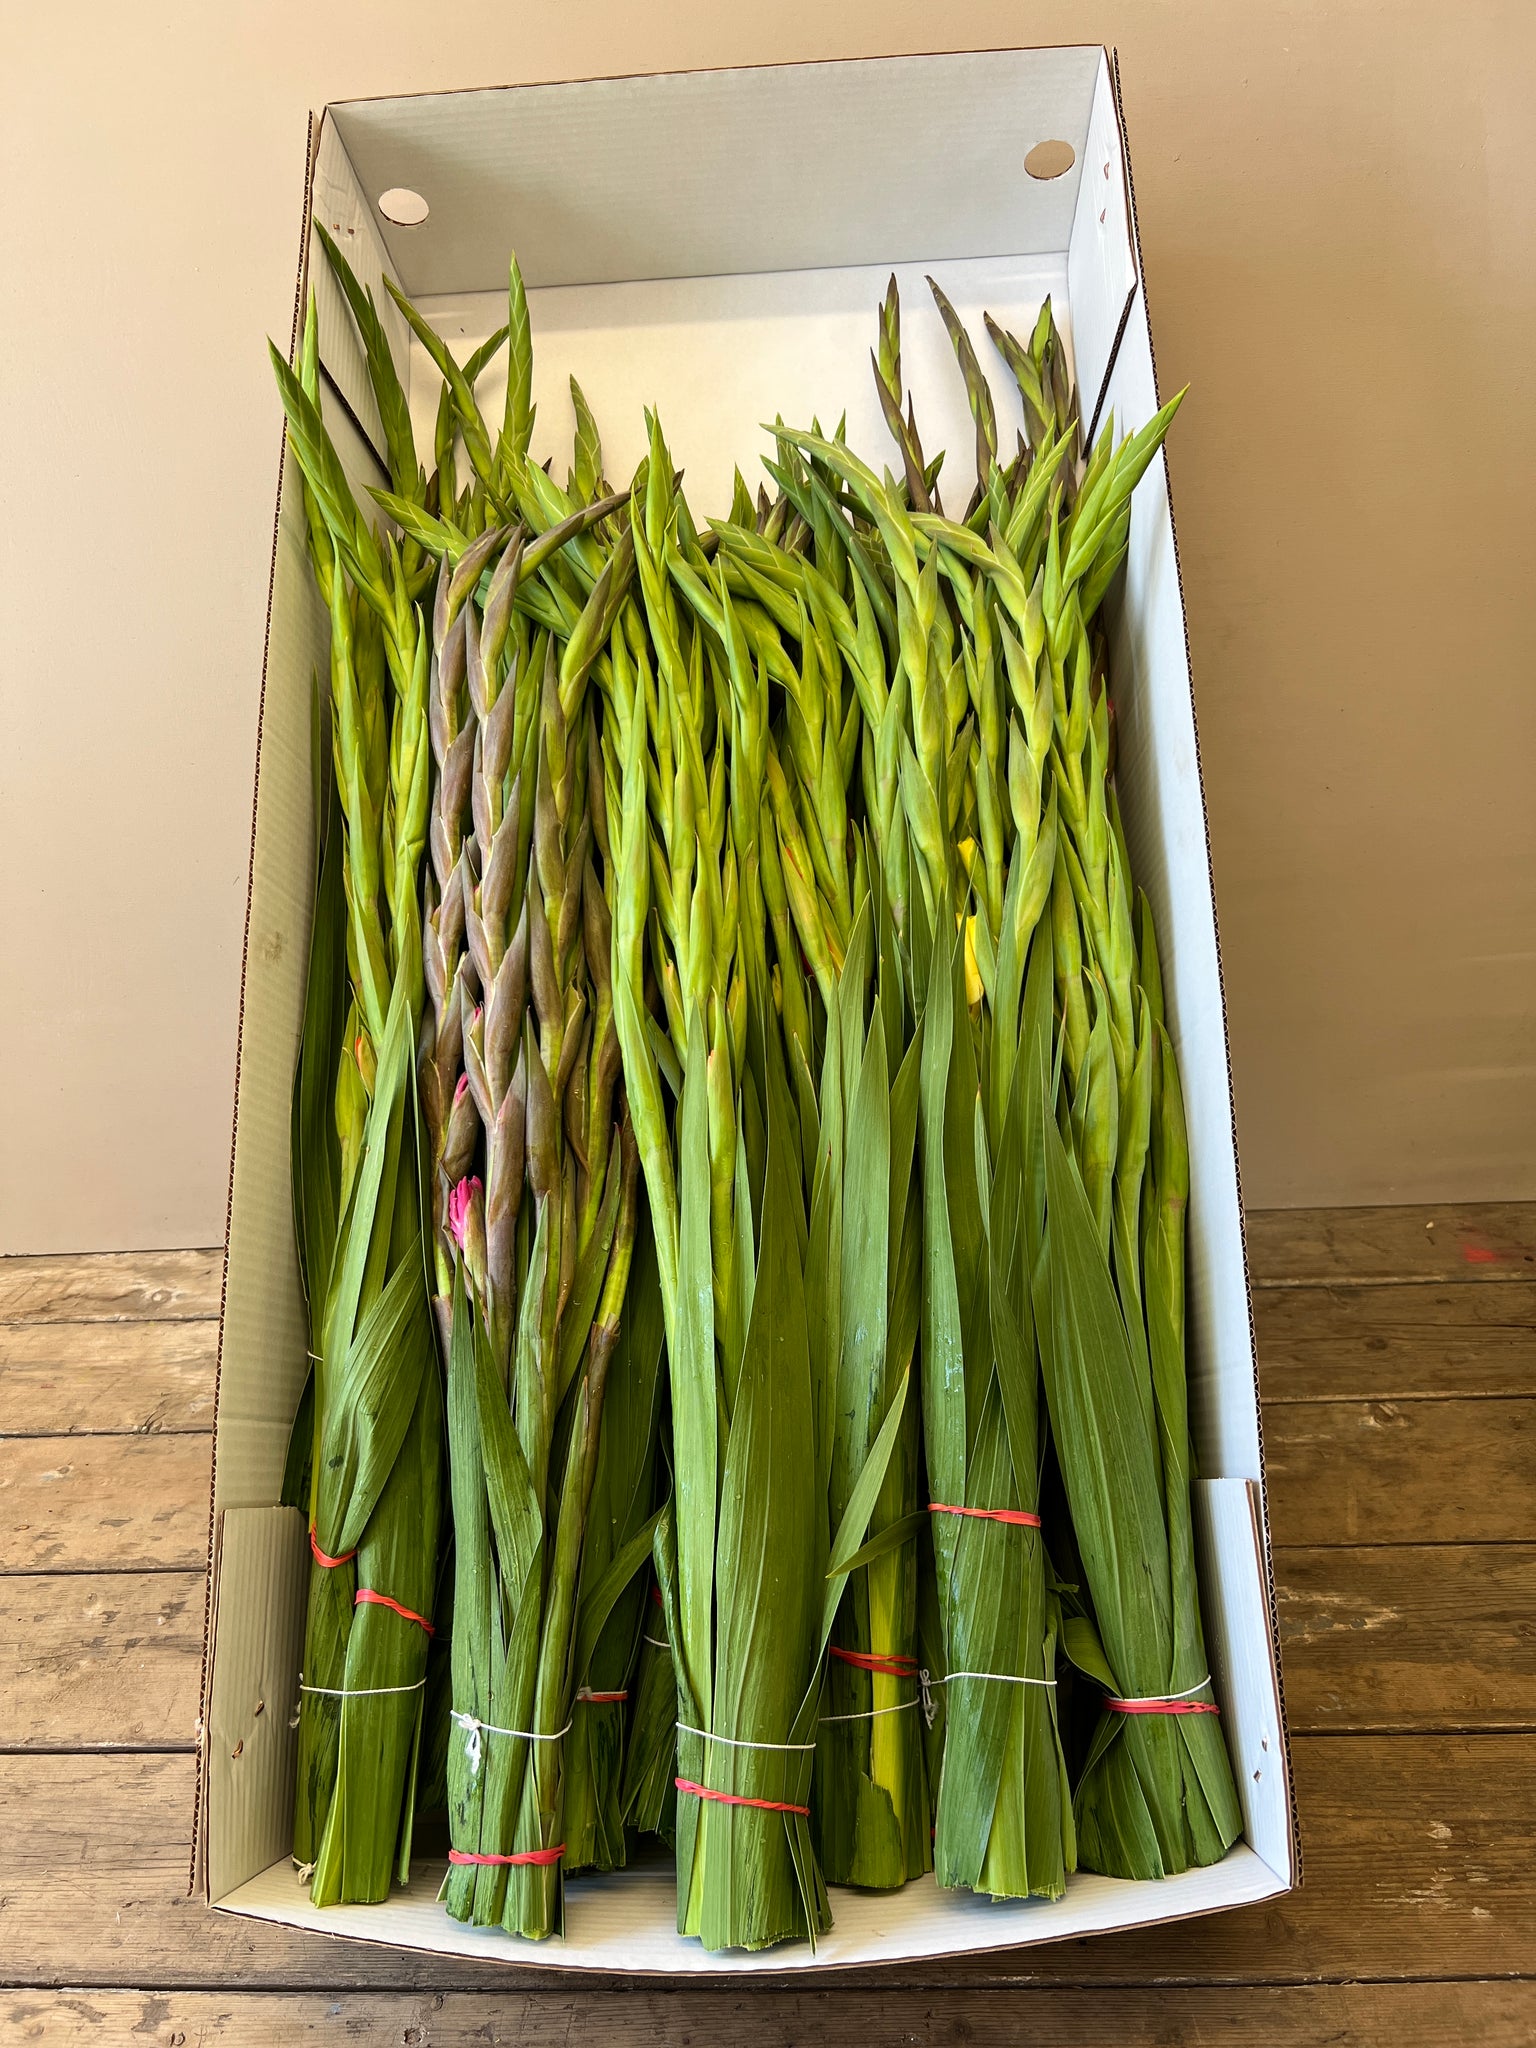 Gladioli - BOX OFFER - 100 stems / 20 bunches Mixed colours